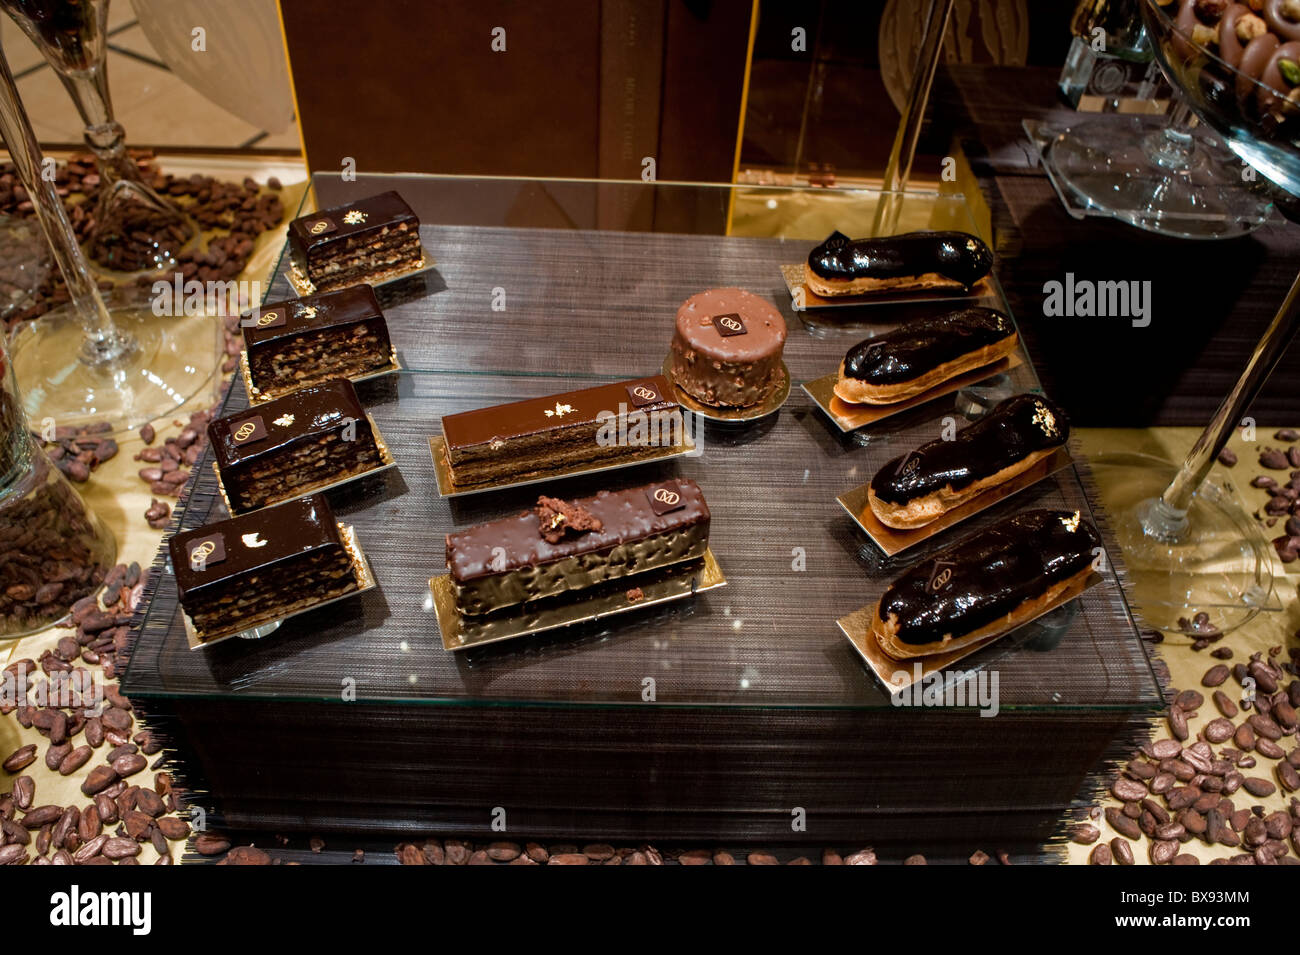 Paris, France, Clsoe up,  Luxury Shopping, 'Michel Cluizel', French Chocolate Shop Window, Eclairs, Cakes on Display, Chocolatier Pastries, sweet shop paris Stock Photo